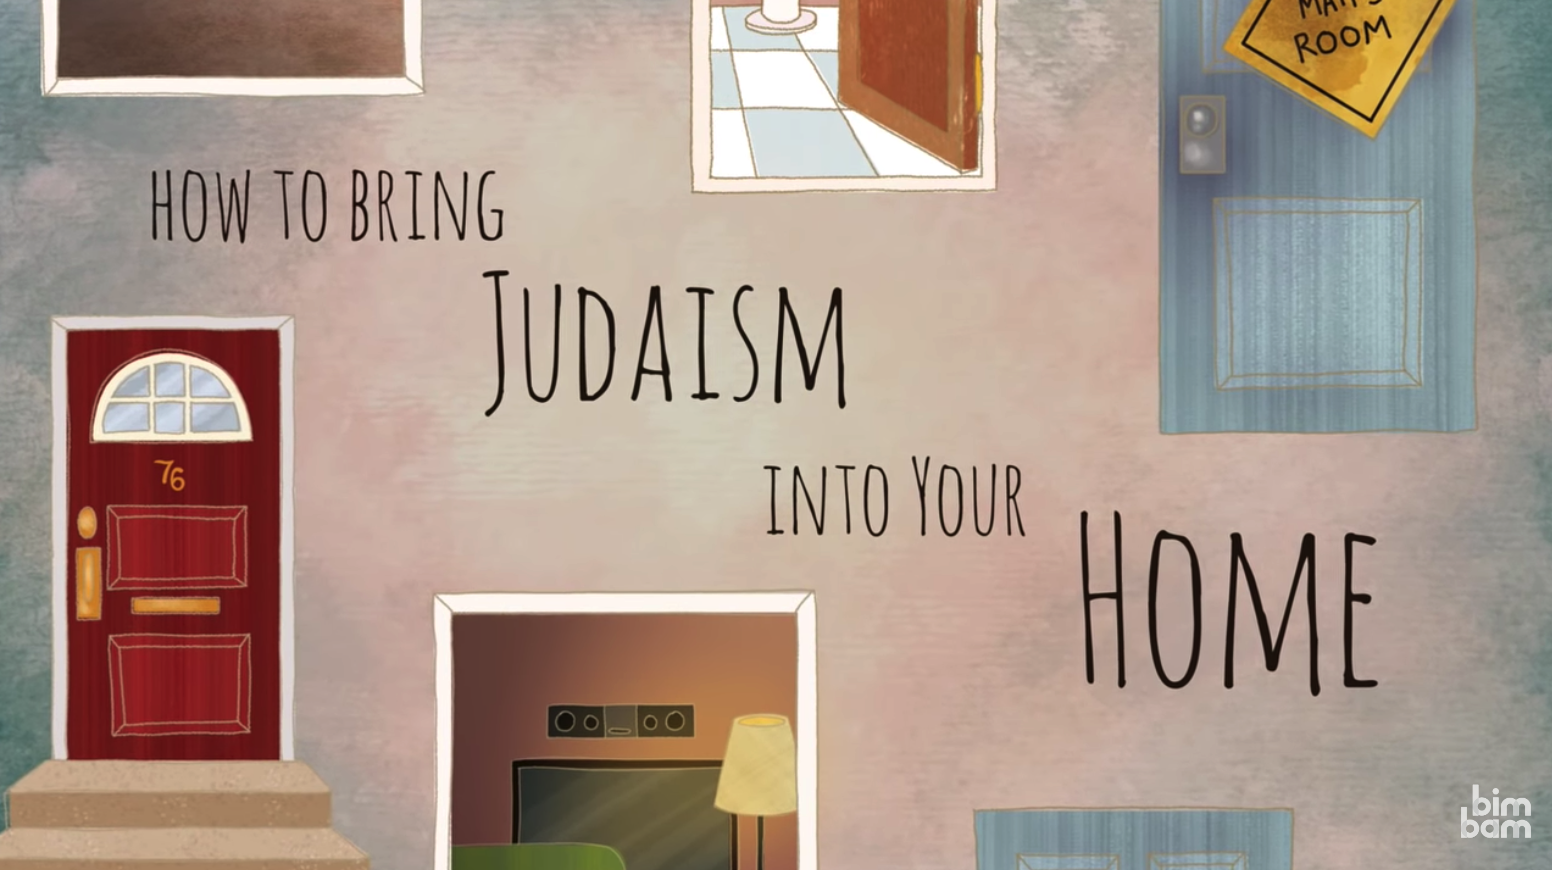 How to Bring Judaism into your Home